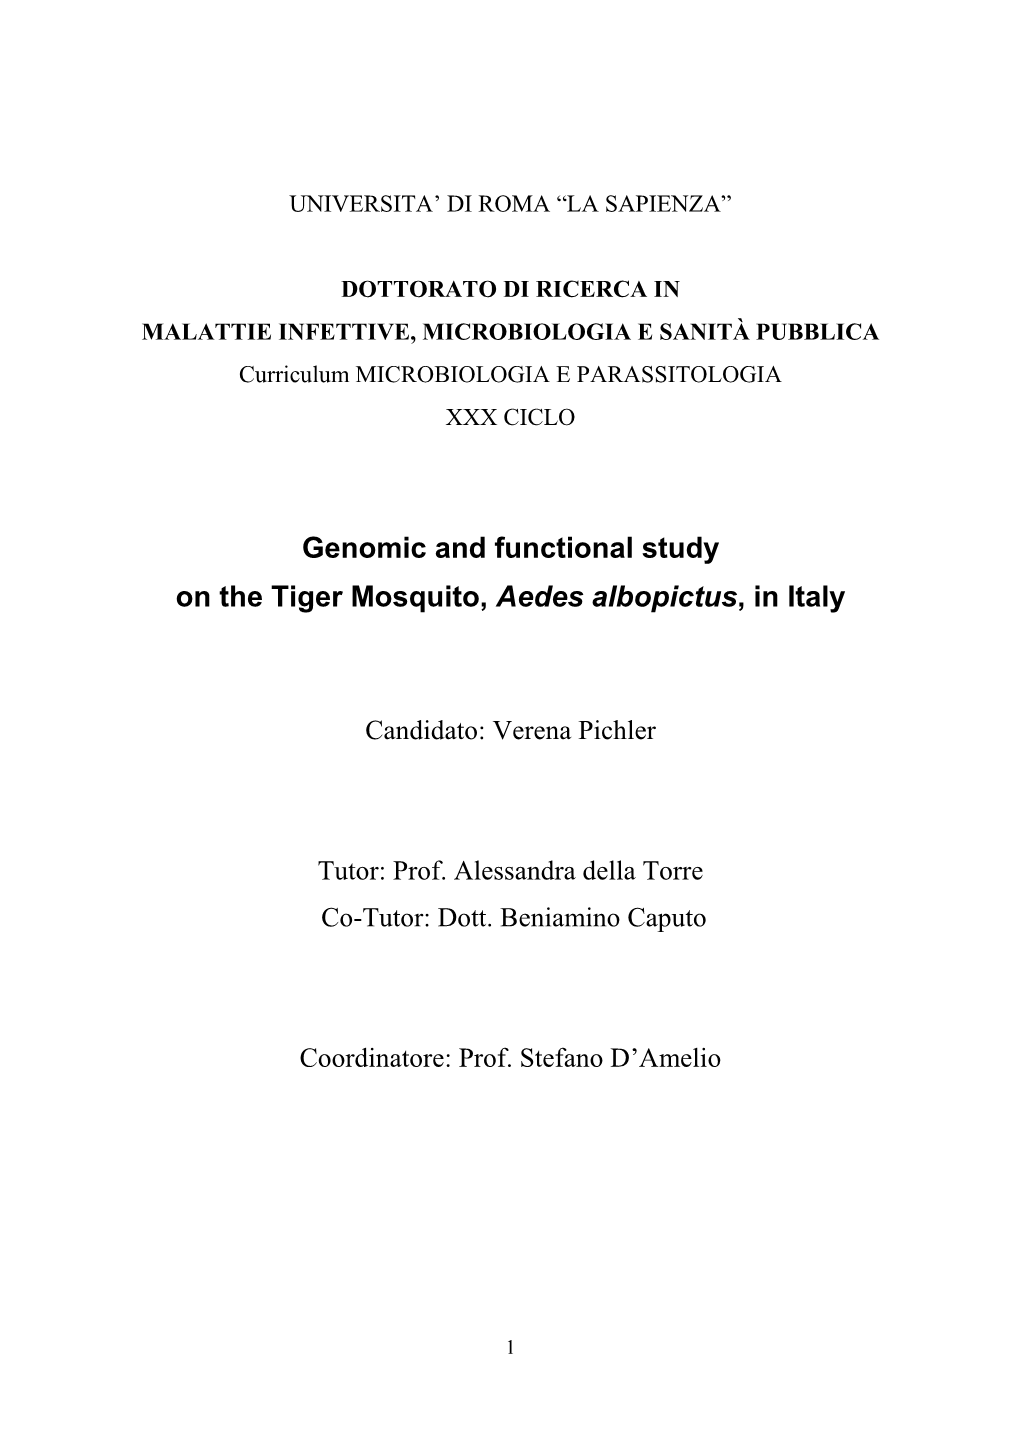 Genomic and Functional Study on the Tiger Mosquito, Aedes Albopictus, in Italy